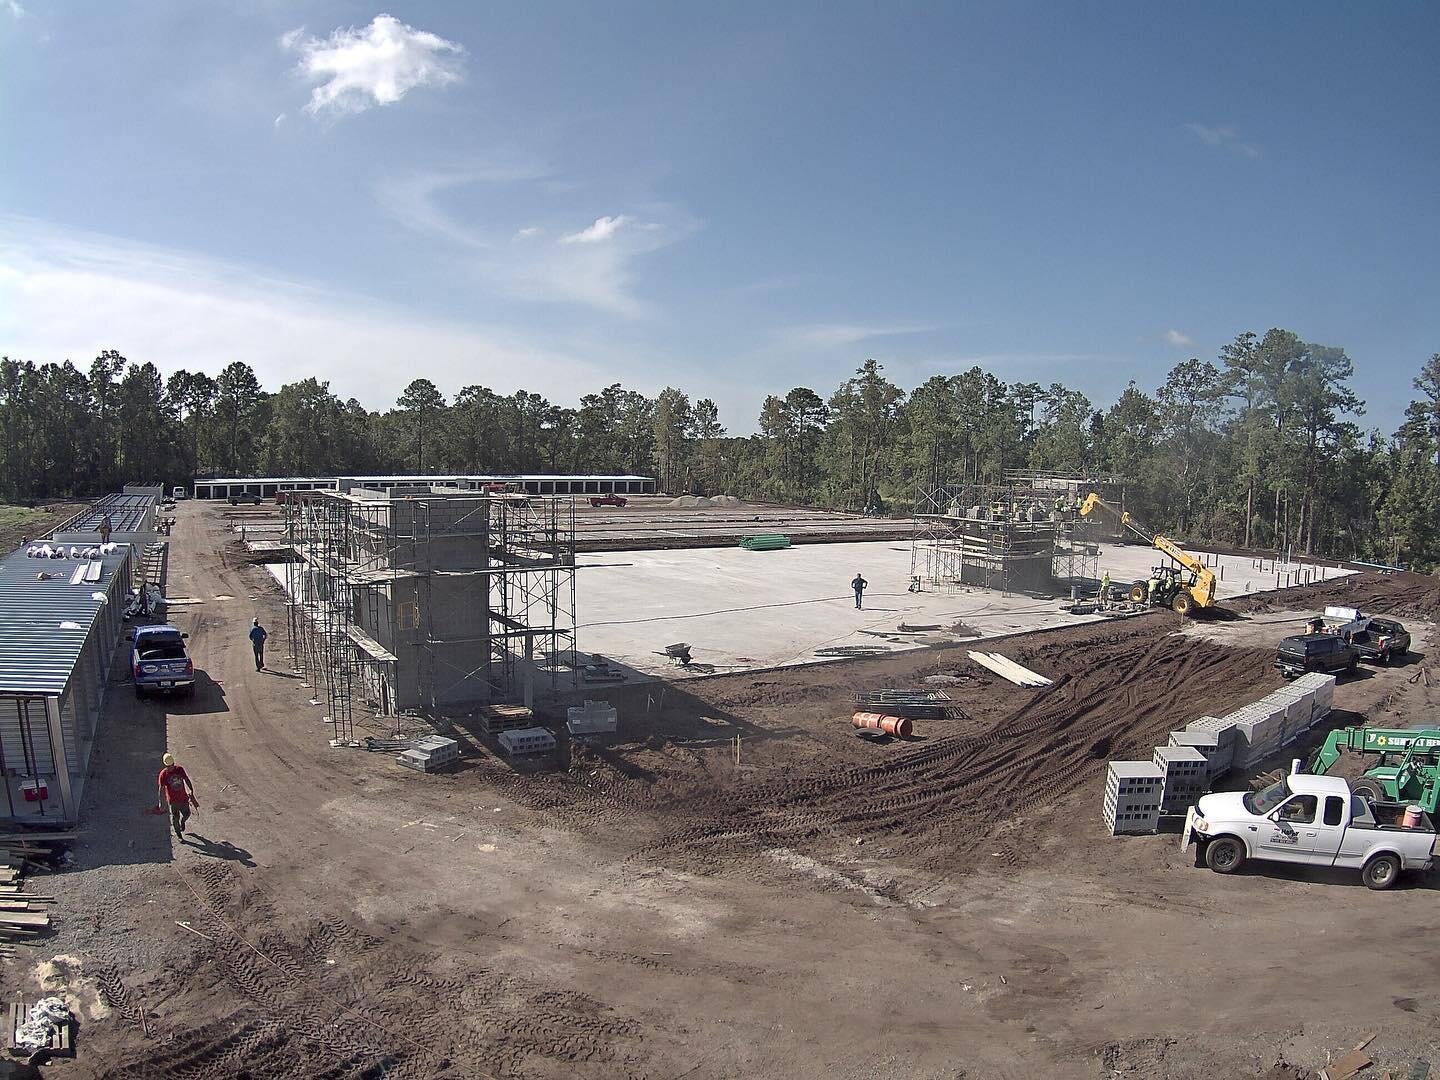 Stairwell shafts are being laid at the largest of 9 buildings at Save-It-All Storage in Myrtle Beach. PEMB erection continues at other buildings. #storagebuilder #builtbetter #ministorage